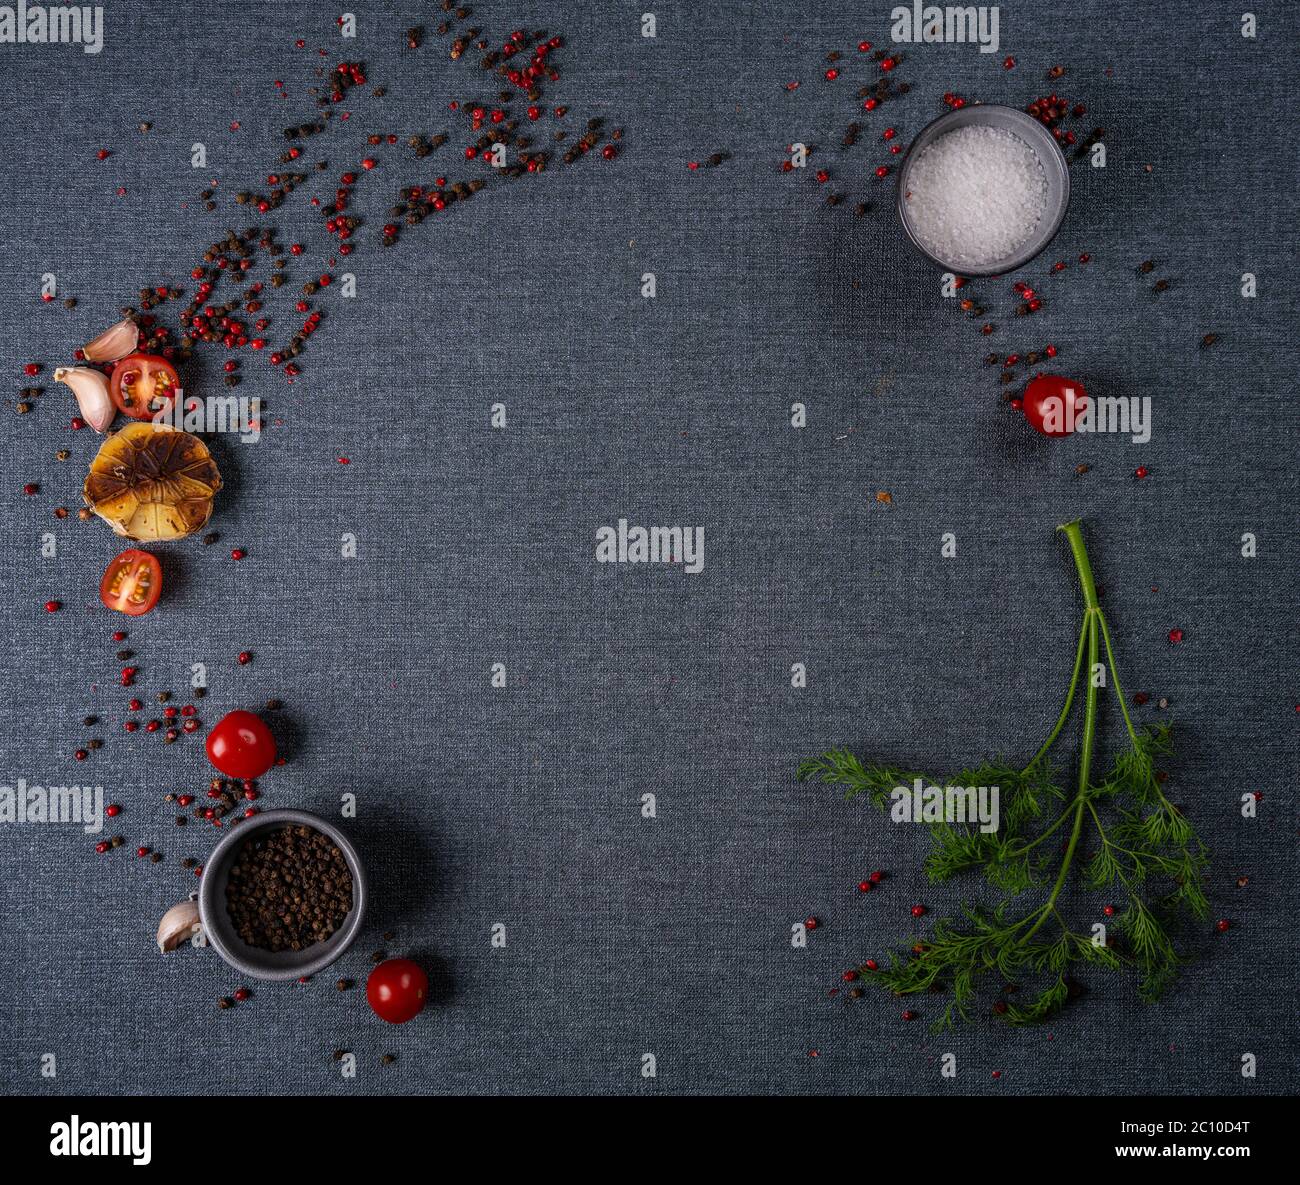 Selection of spices herbs and greens. Ingredients for cooking. Food background on black slate table. Stock Photo